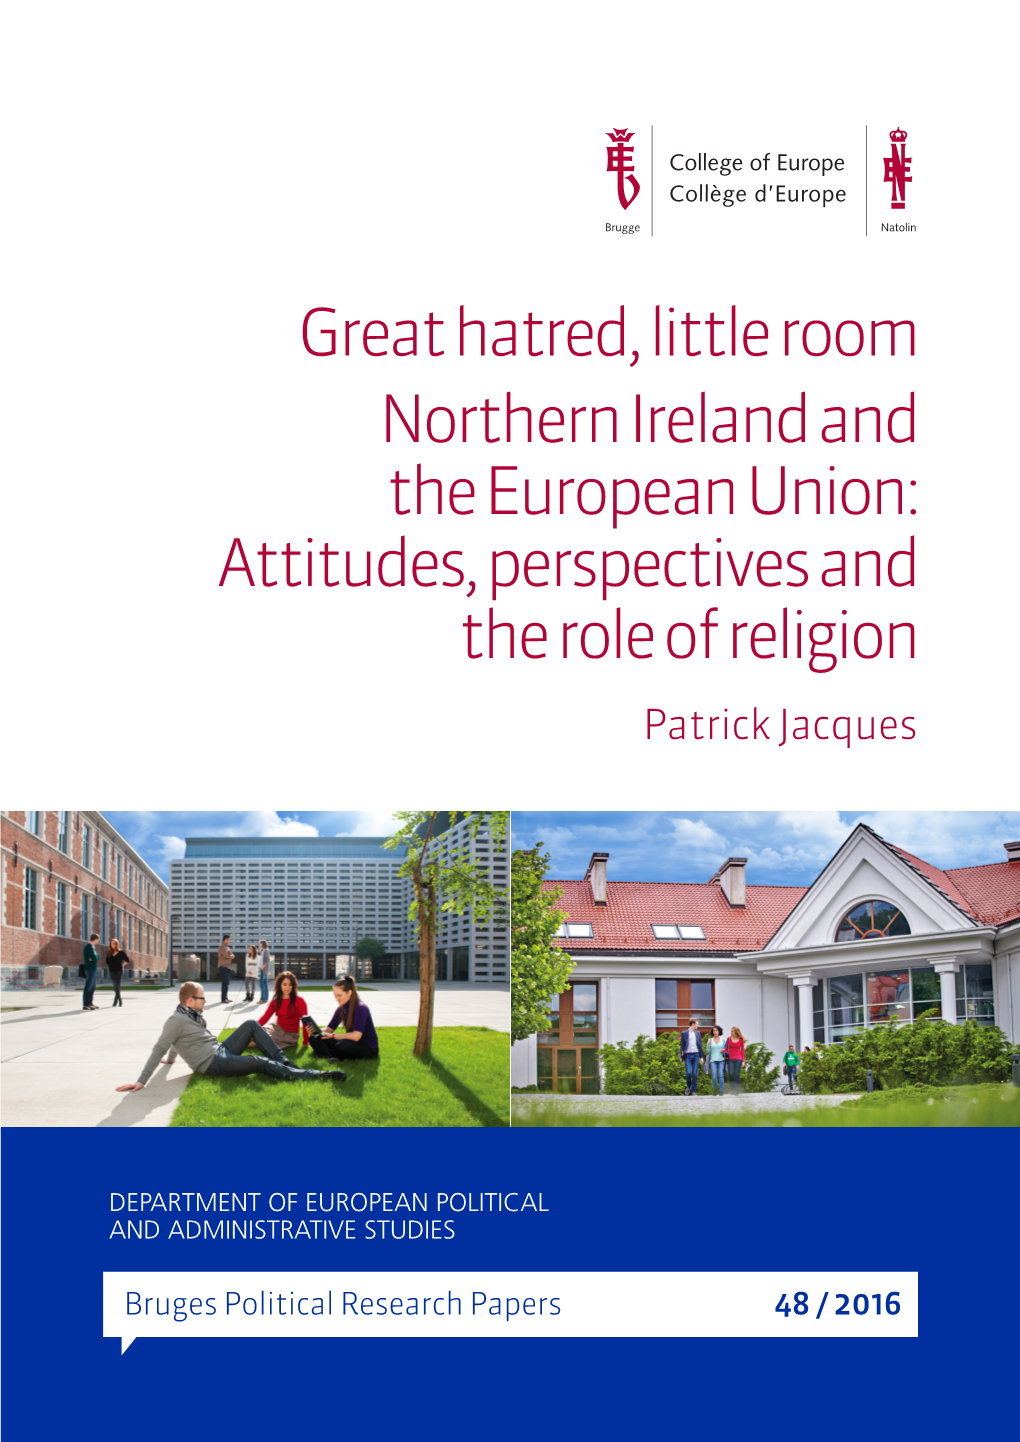 Northern Ireland and the European Union: Attitudes, Perspectives and the Role of Religion Patrick Jacques